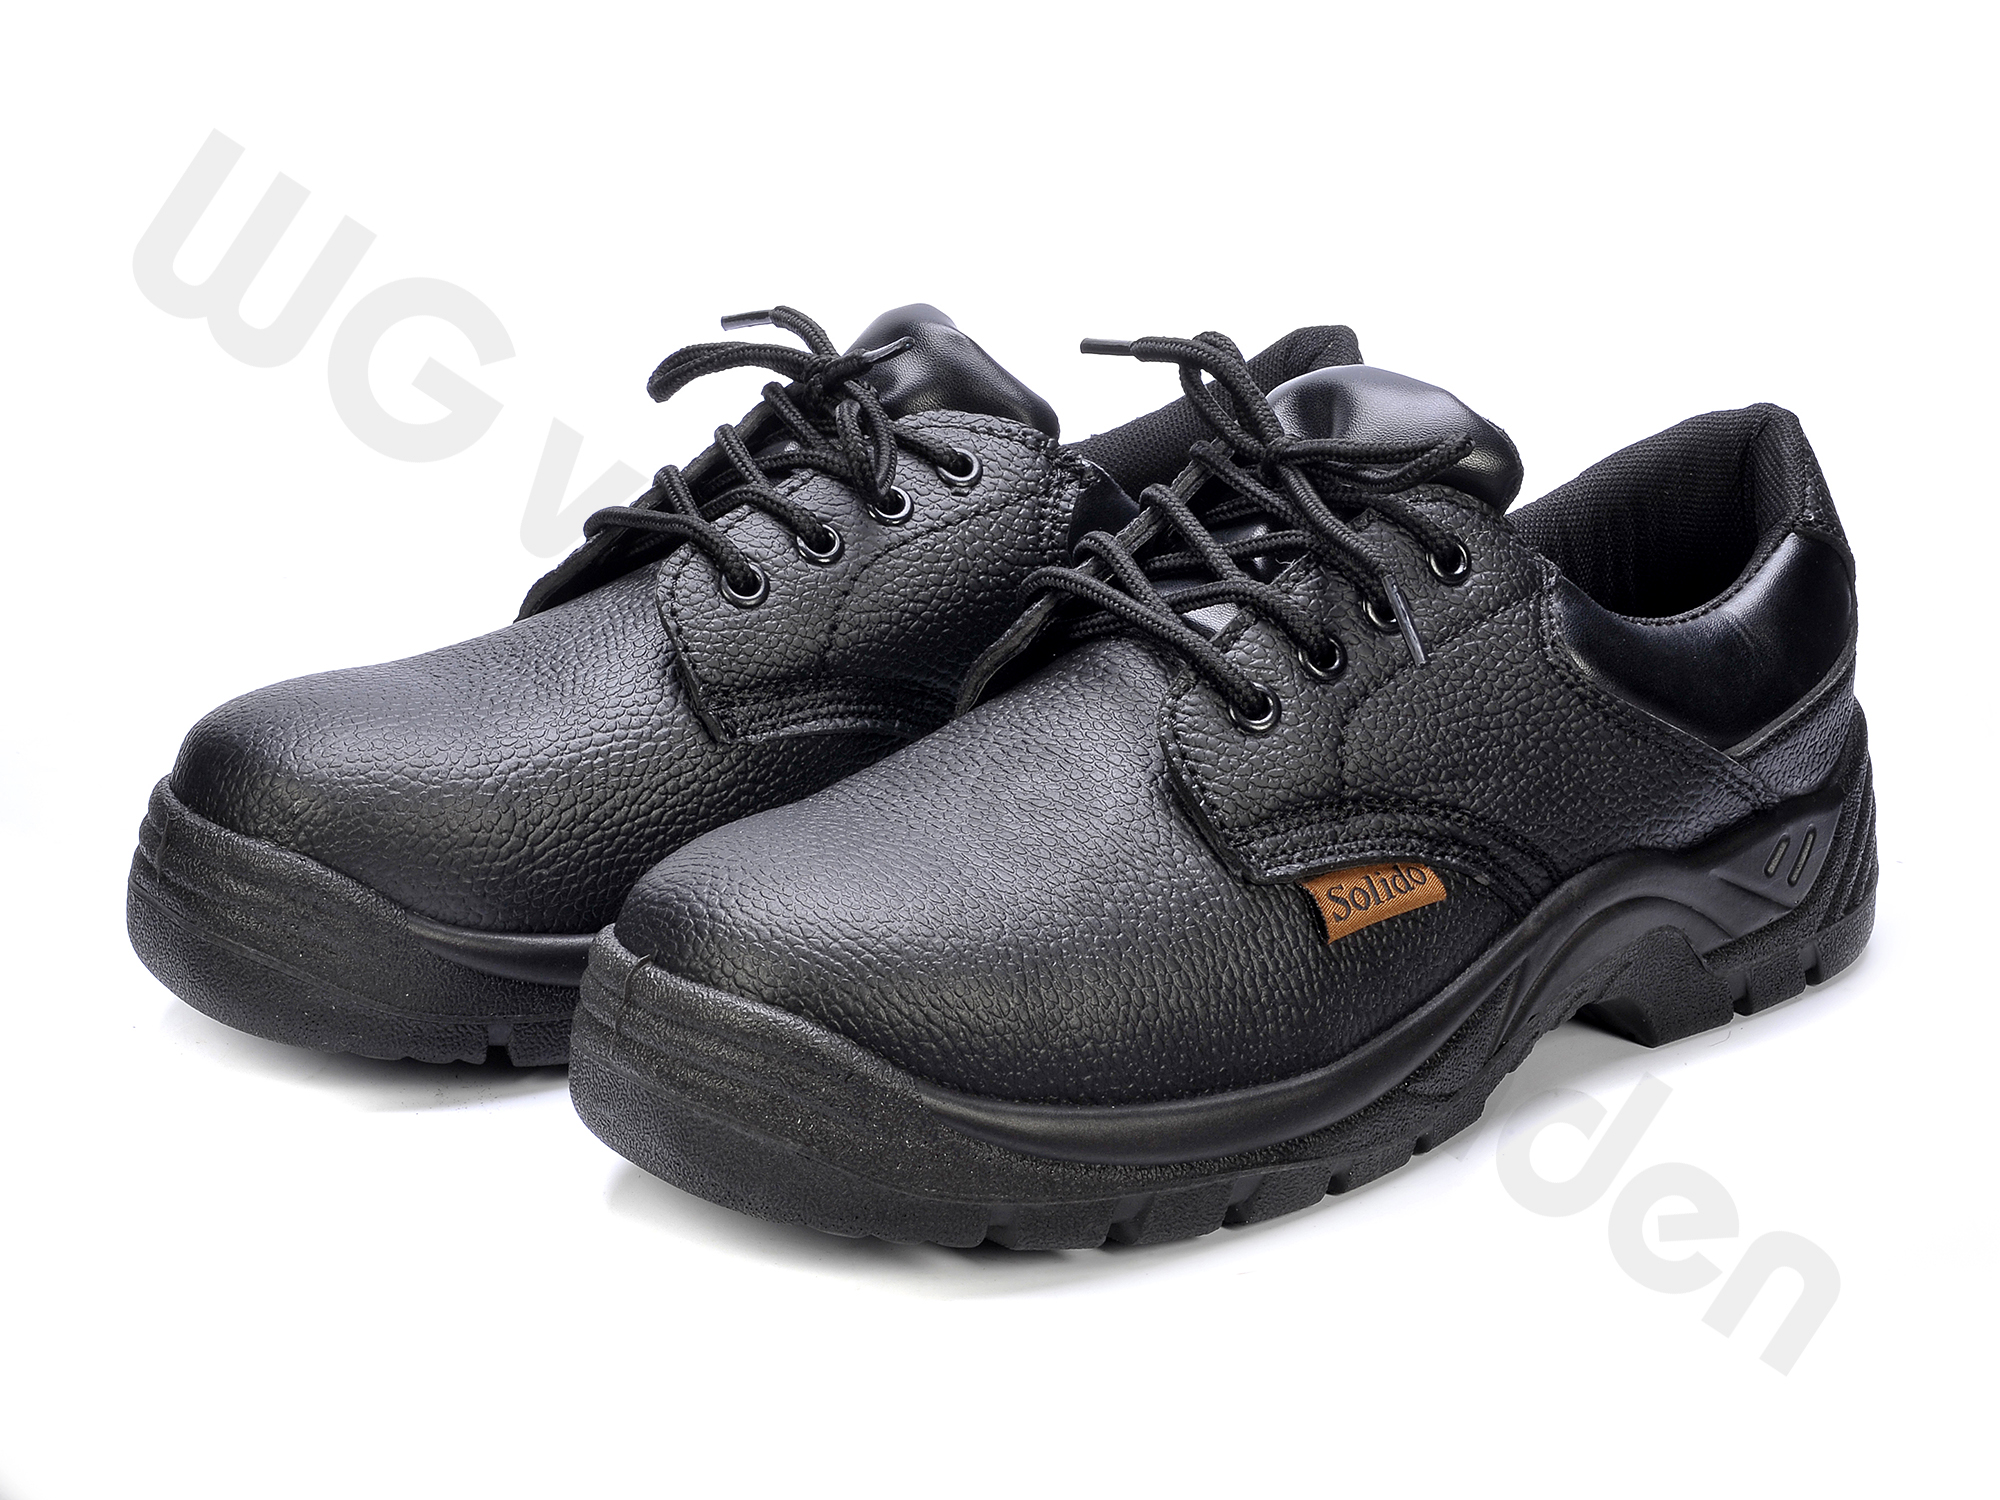 880608 SHOES SAFETY S1 WITH STEEL TOE SIZE 45 / 28.5CM CE